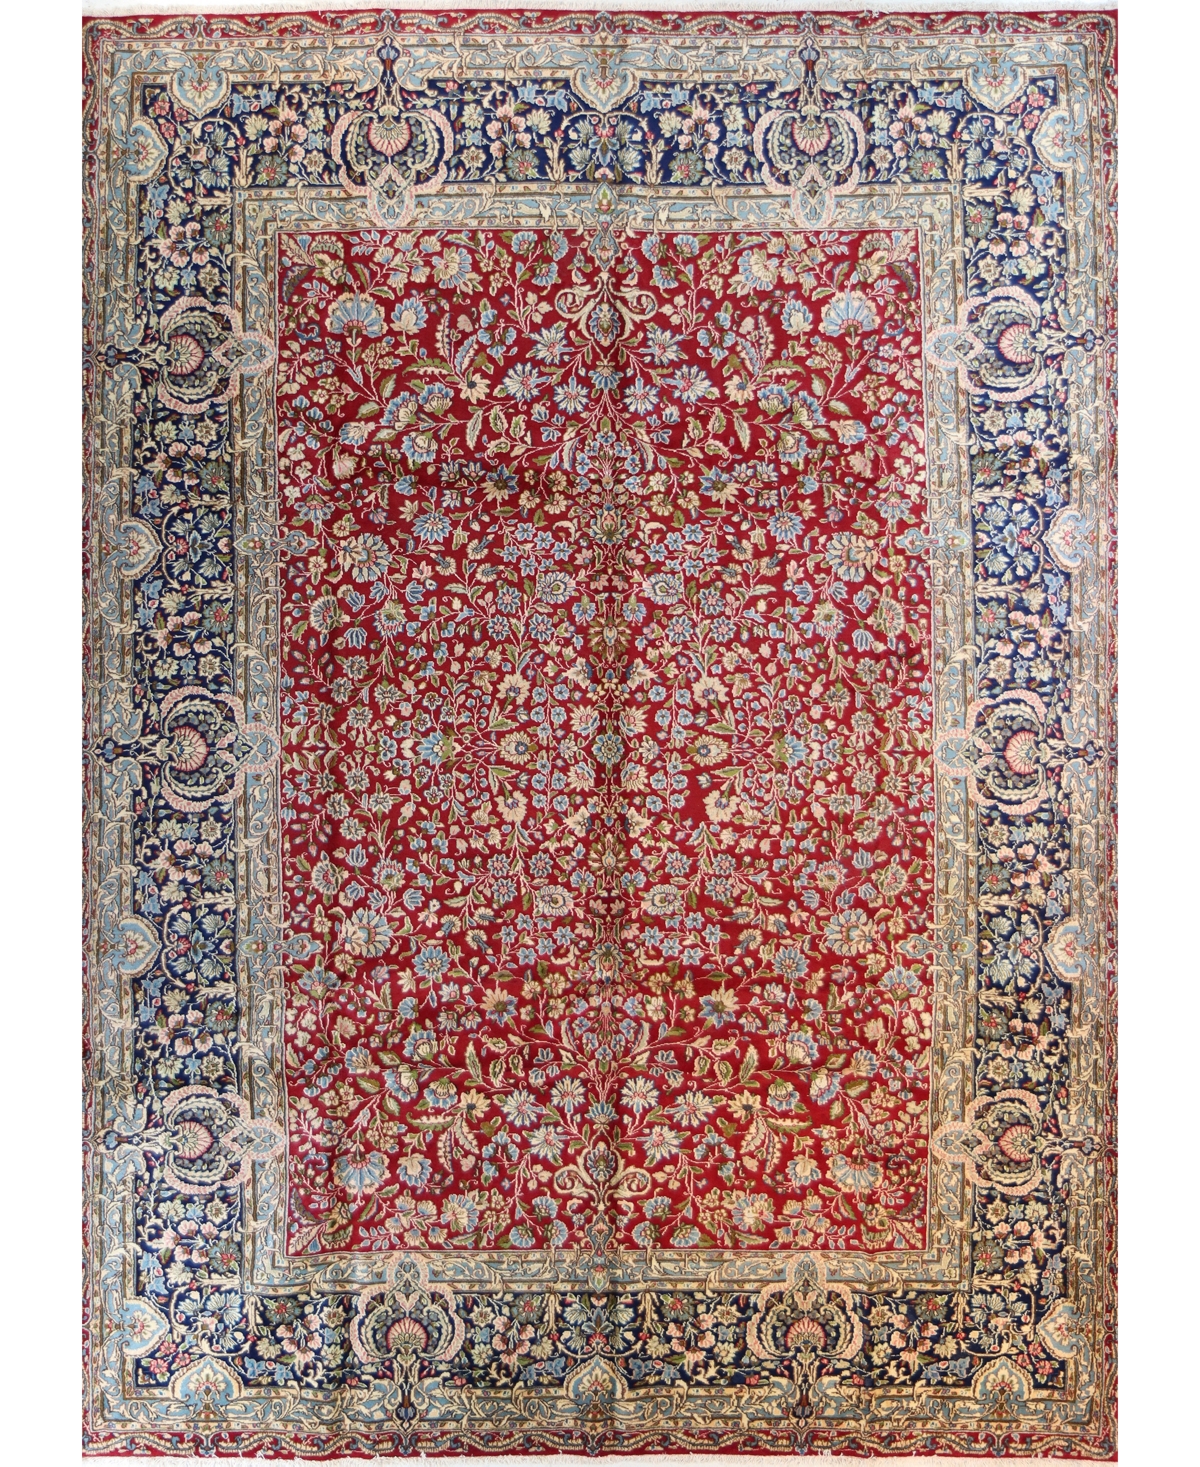 Bb Rugs One Of A Kind Nain Kerman 626364 10' X 13'7" Area Rug In Red